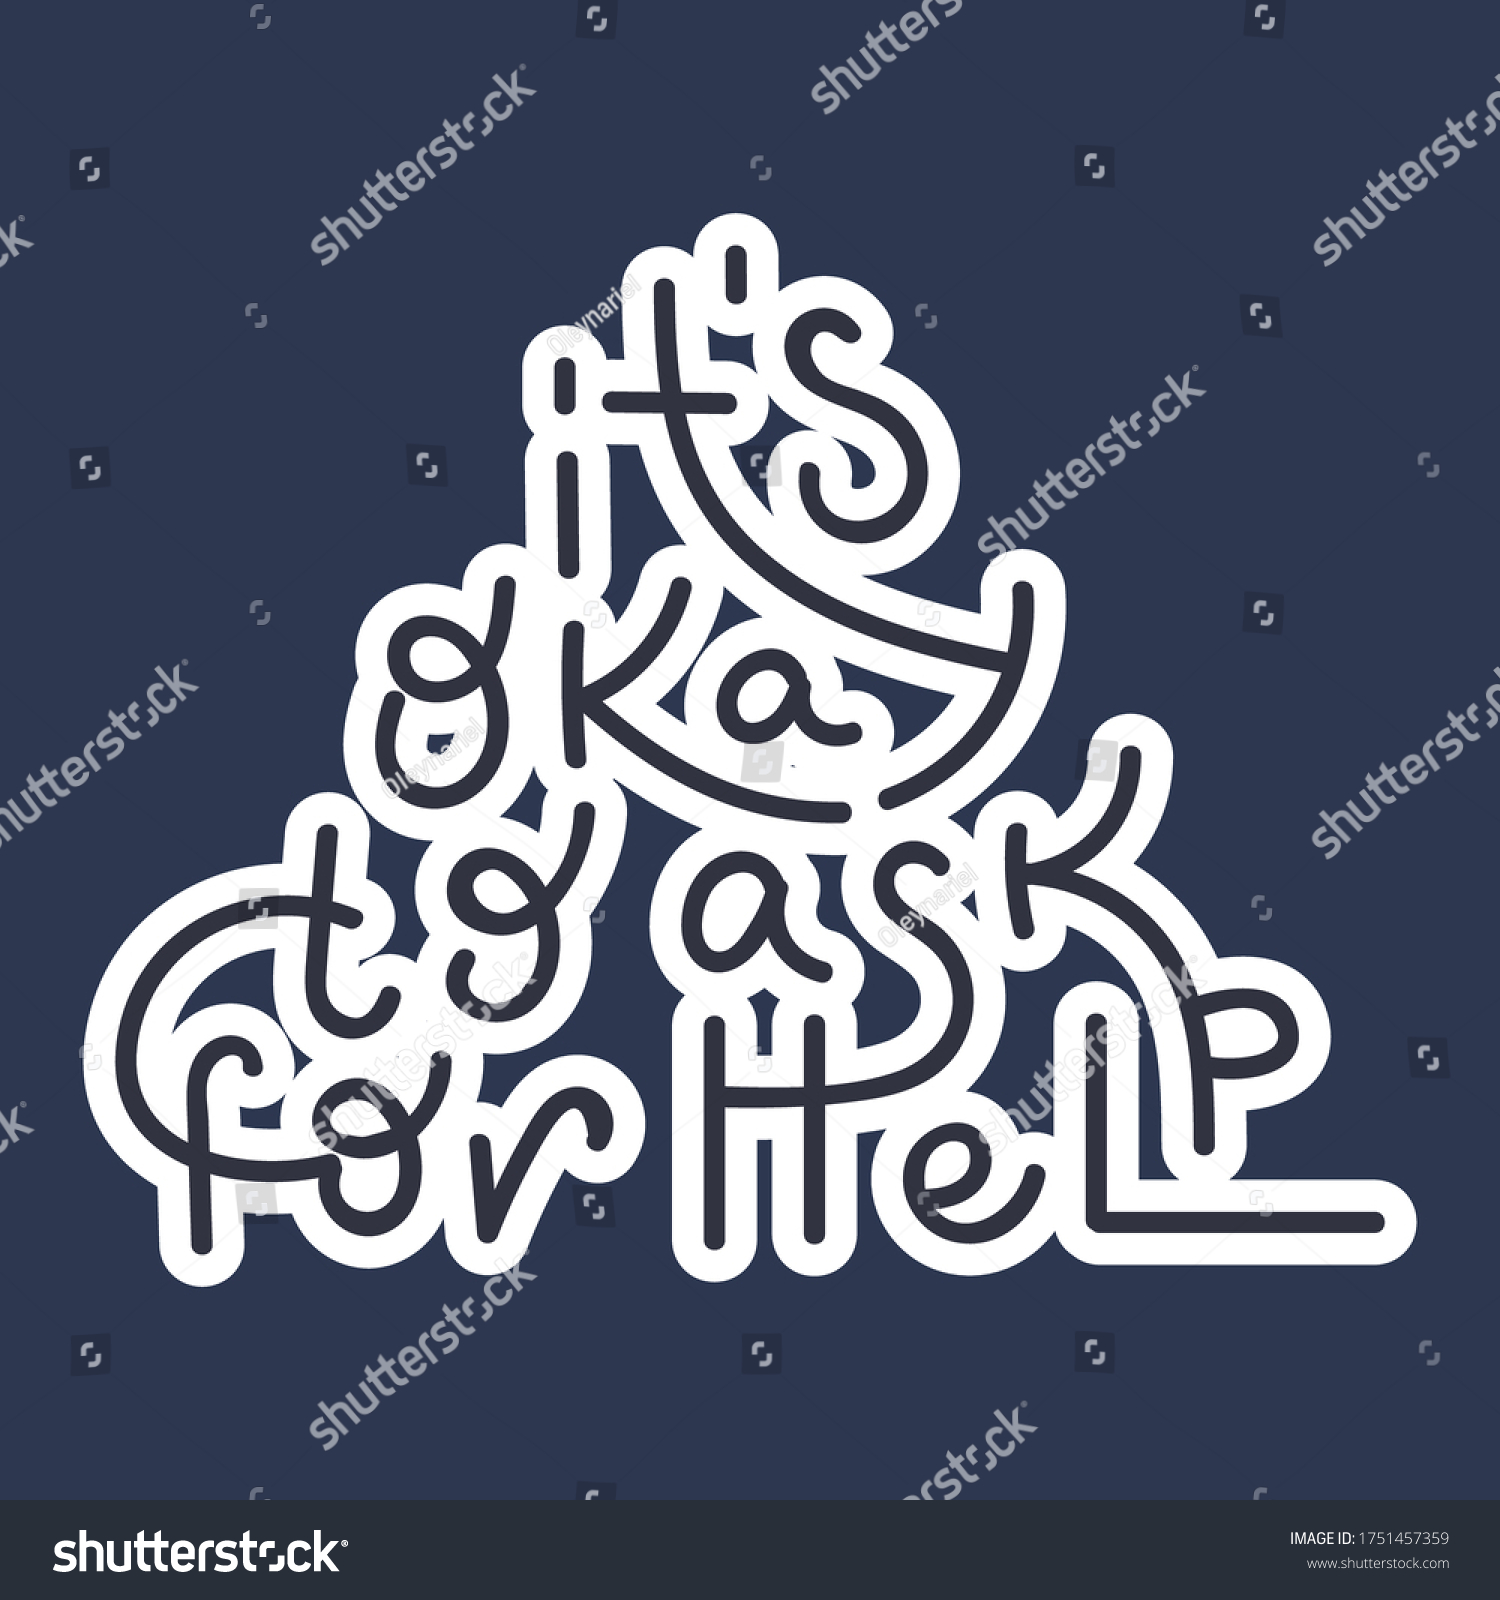 Okay Ask Help Hand Drawn Lettering Stock Vector Royalty Free